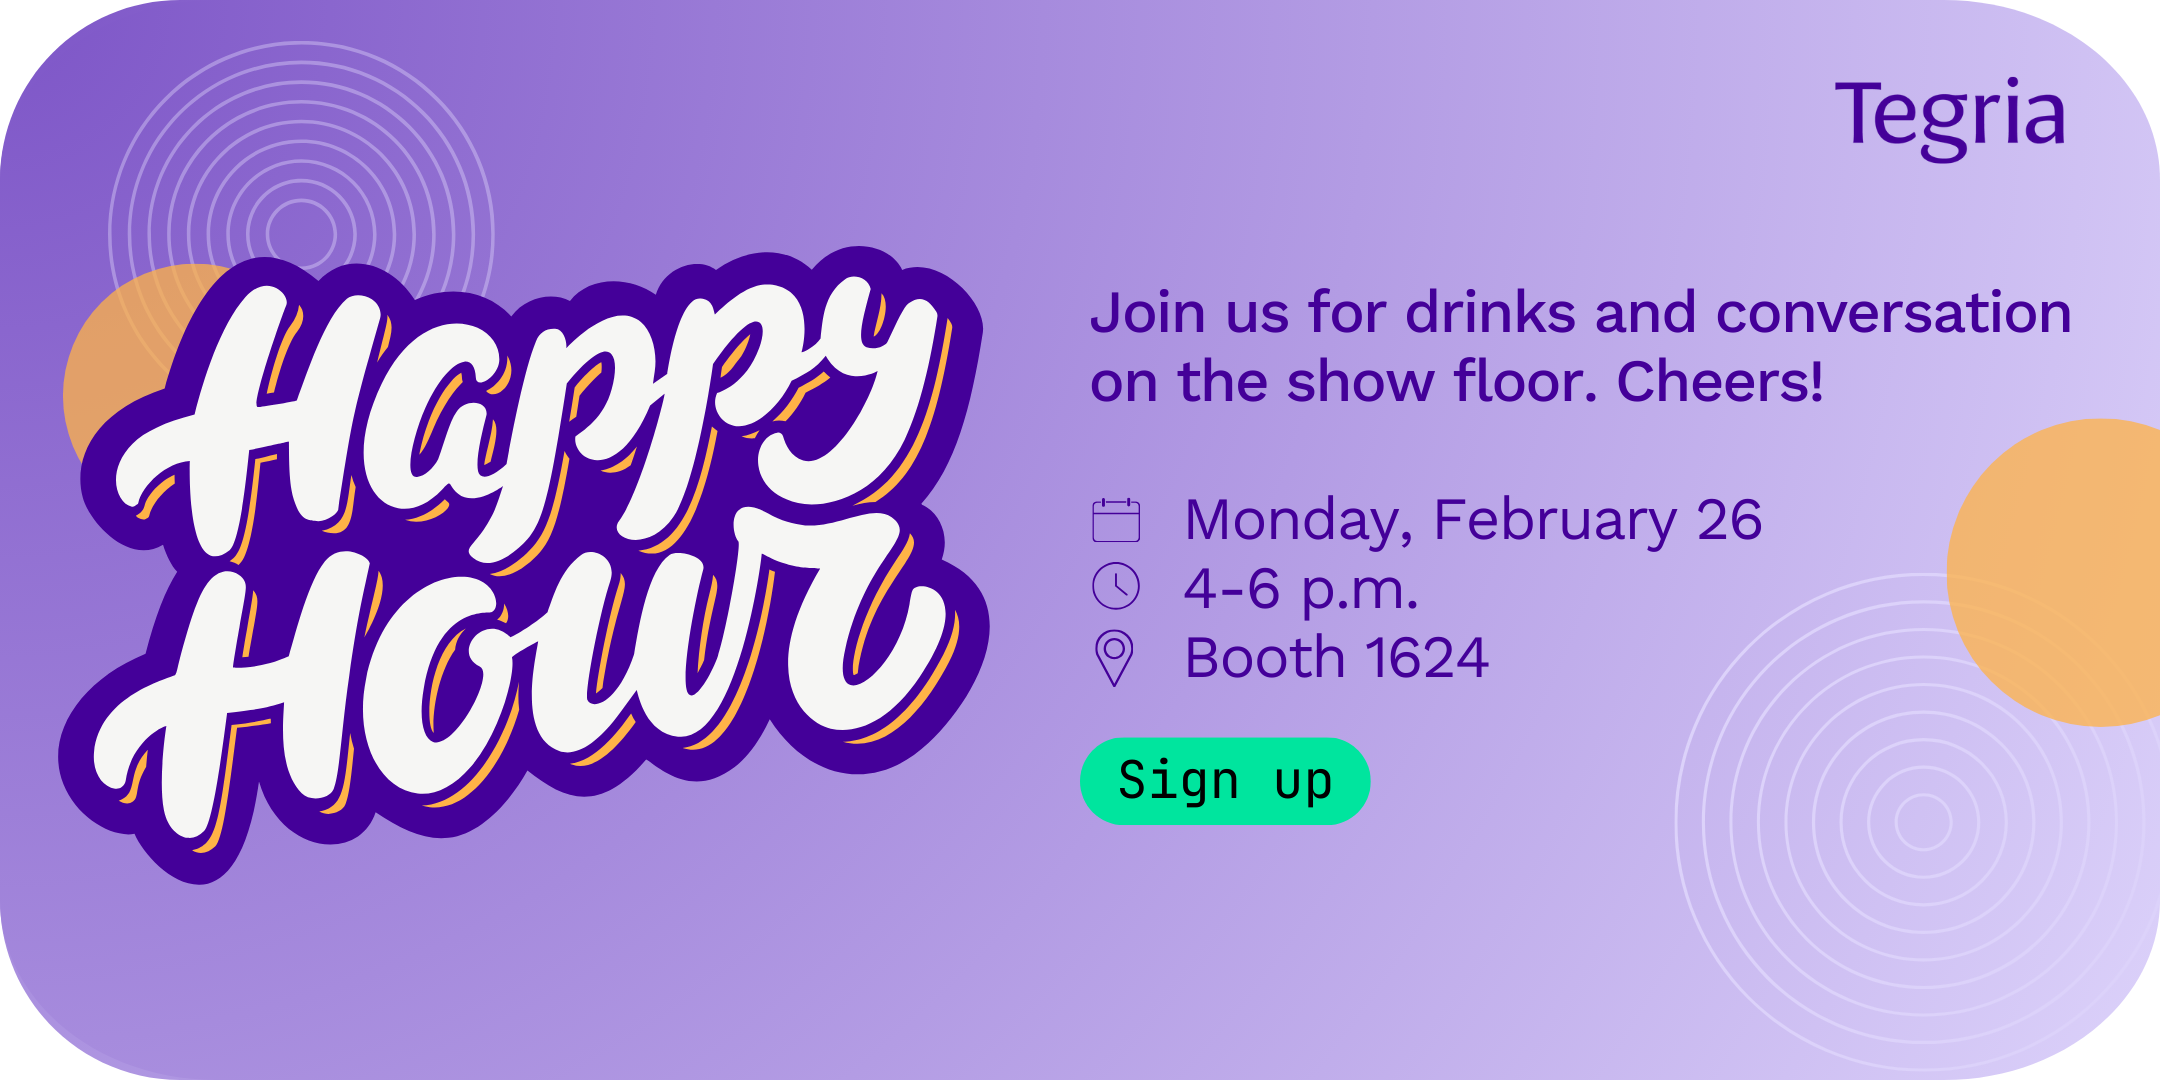 Tegria-happy-hour-feb-26th-at-booth-1624